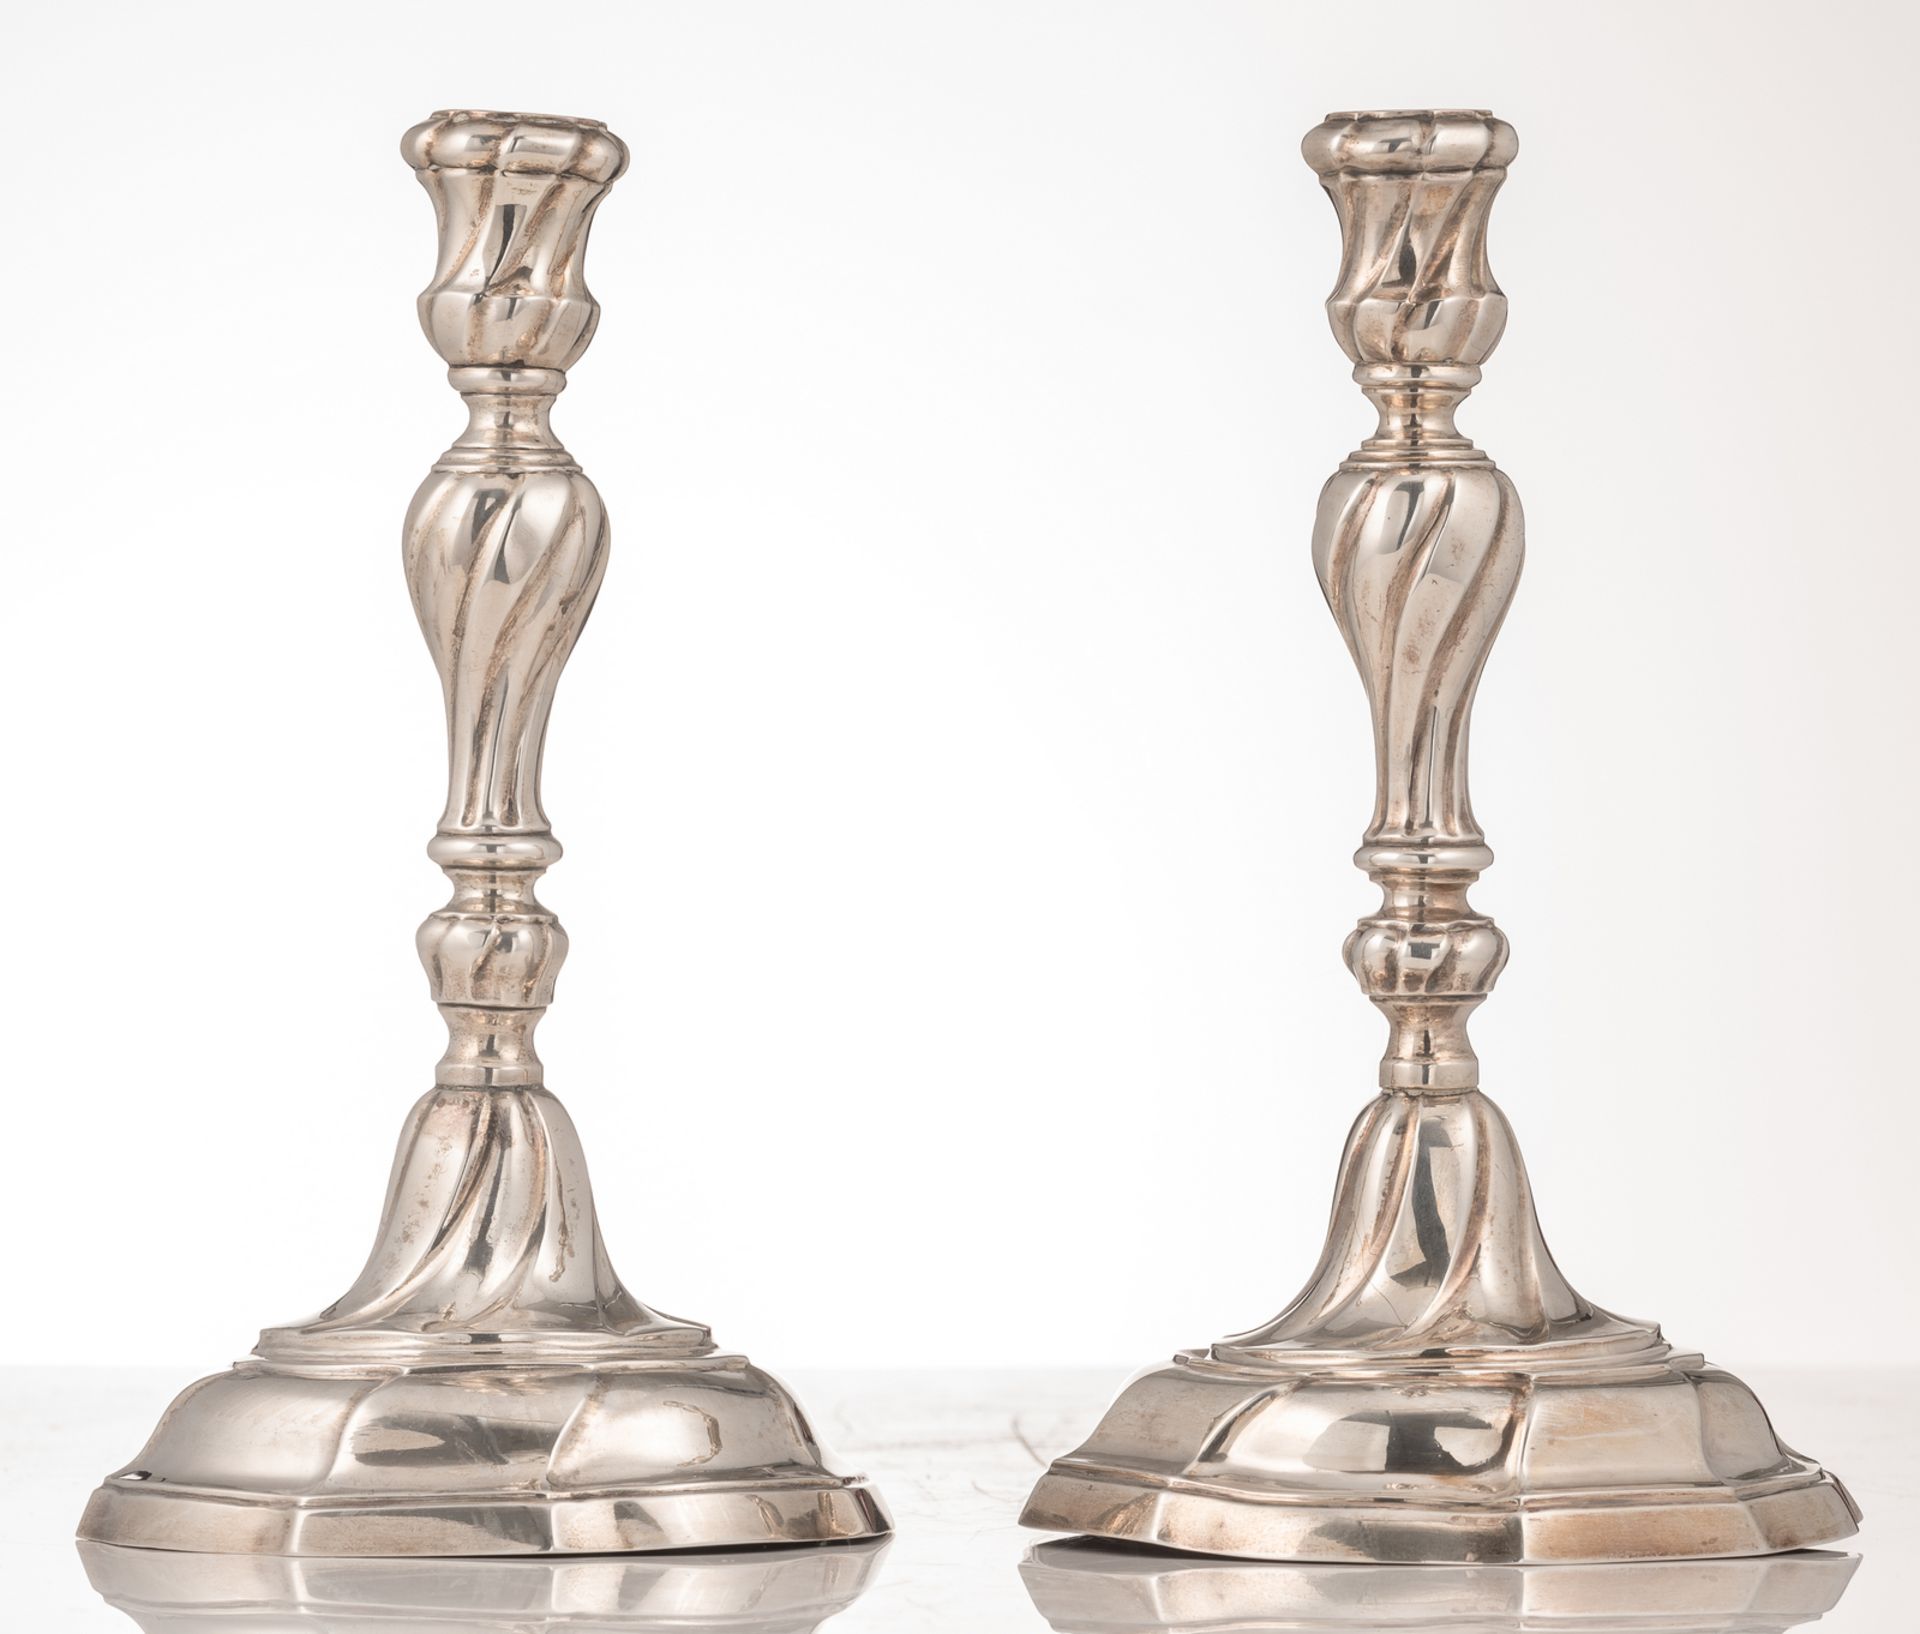 A pair of silver rococo candlesticks, Ghent hallmark, date letter (17)75, maker's mark J.B. Ms - Image 3 of 6